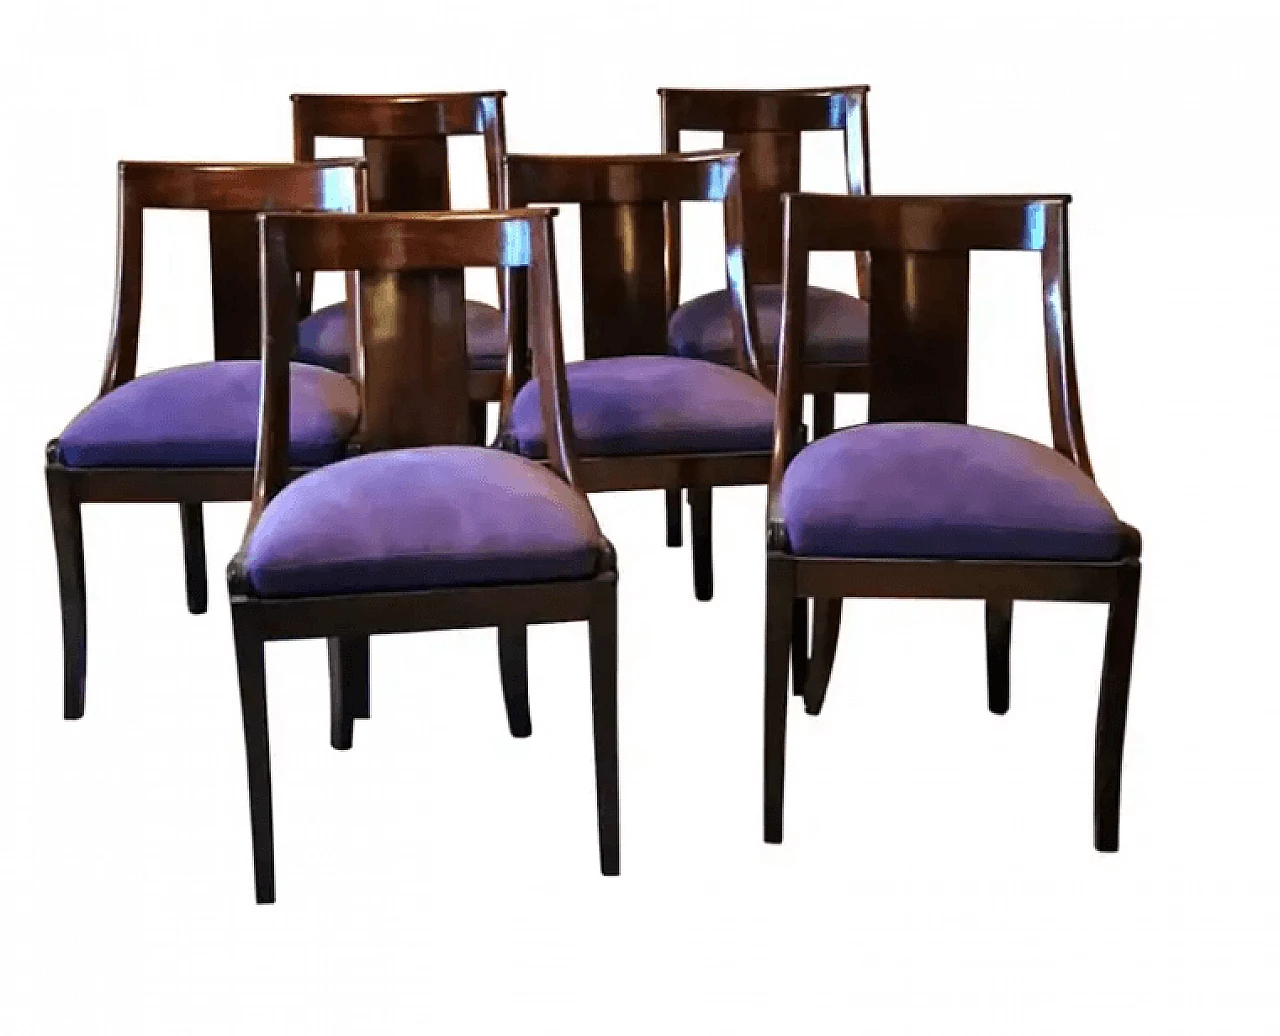 6 Gondola chairs in wood and cotton, 1920s 1